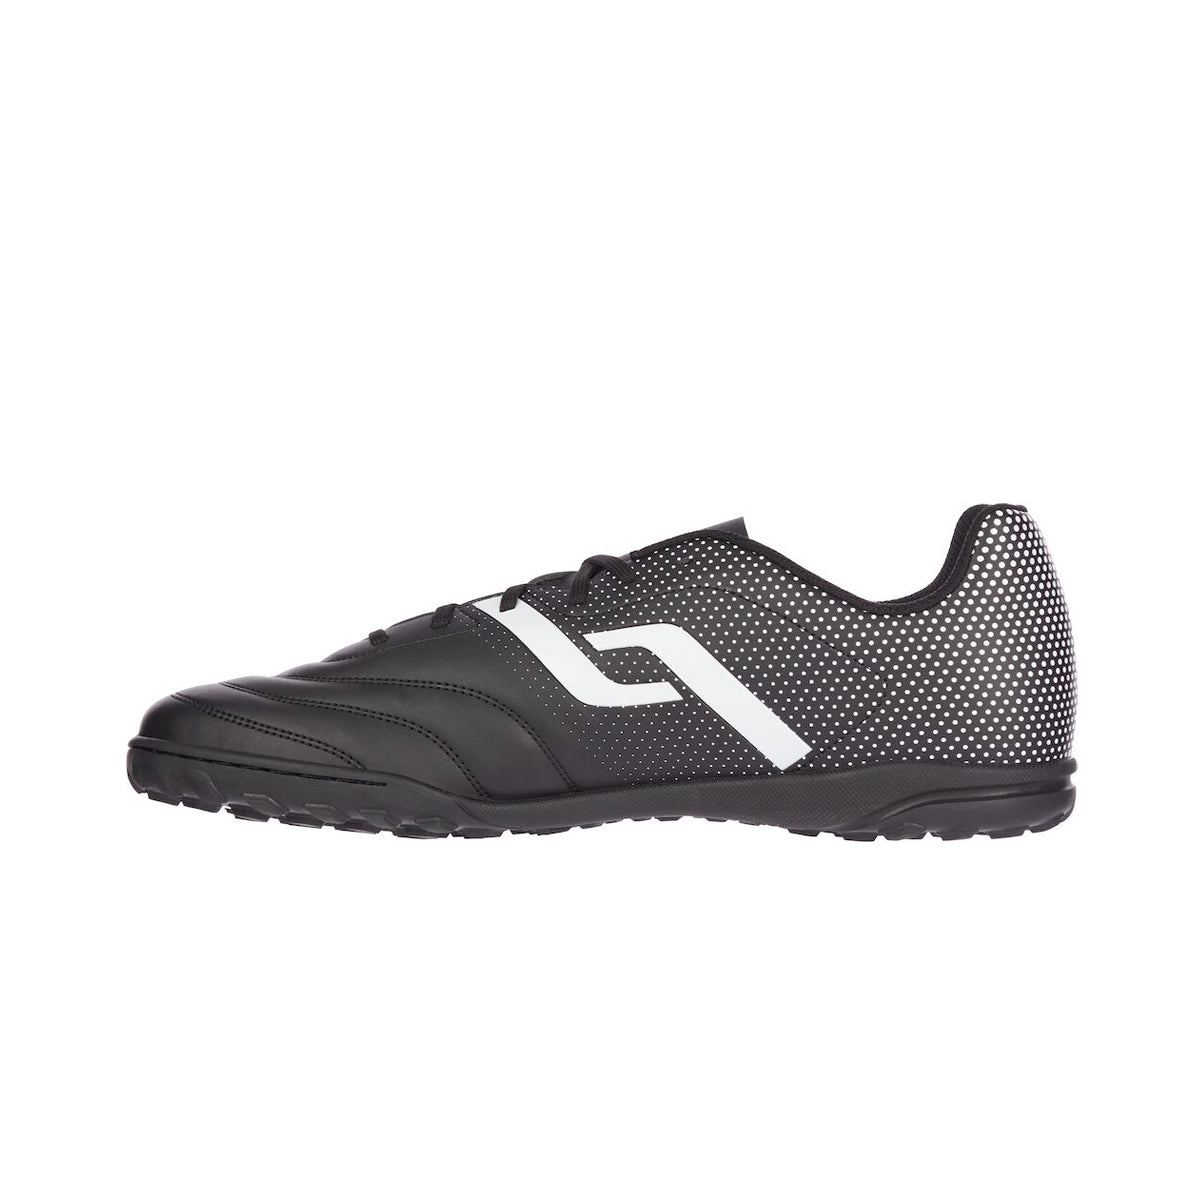 Pro Touch Classic Football Tartan Shoes For Men, Black & White